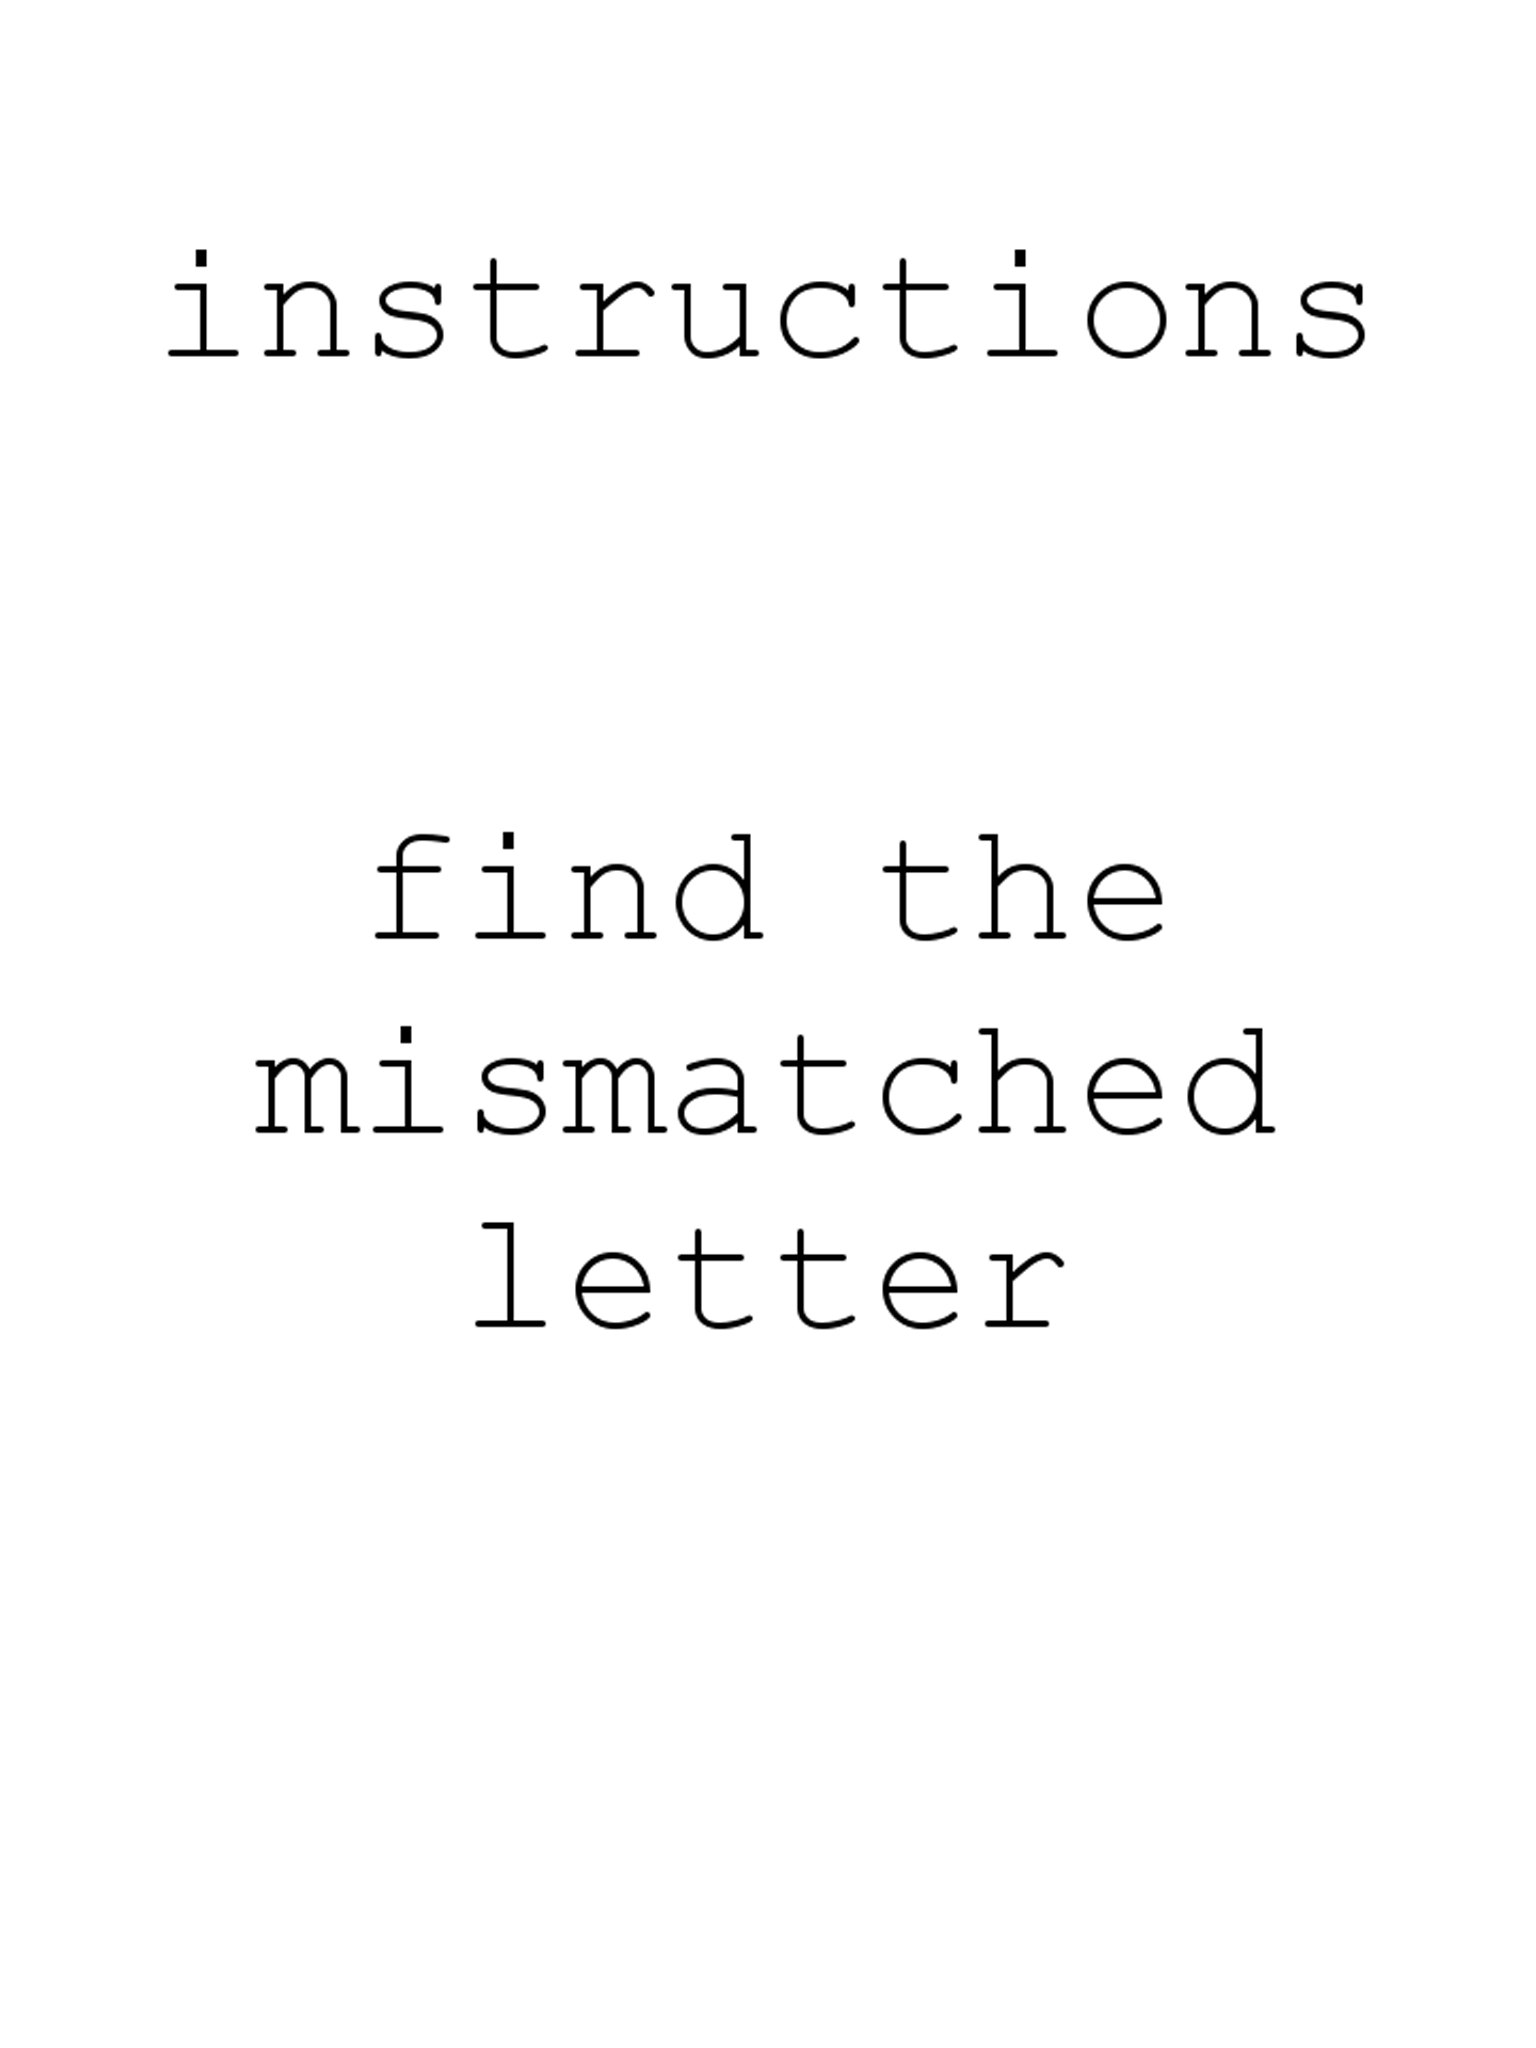 The Impossible Letter Game screenshot game